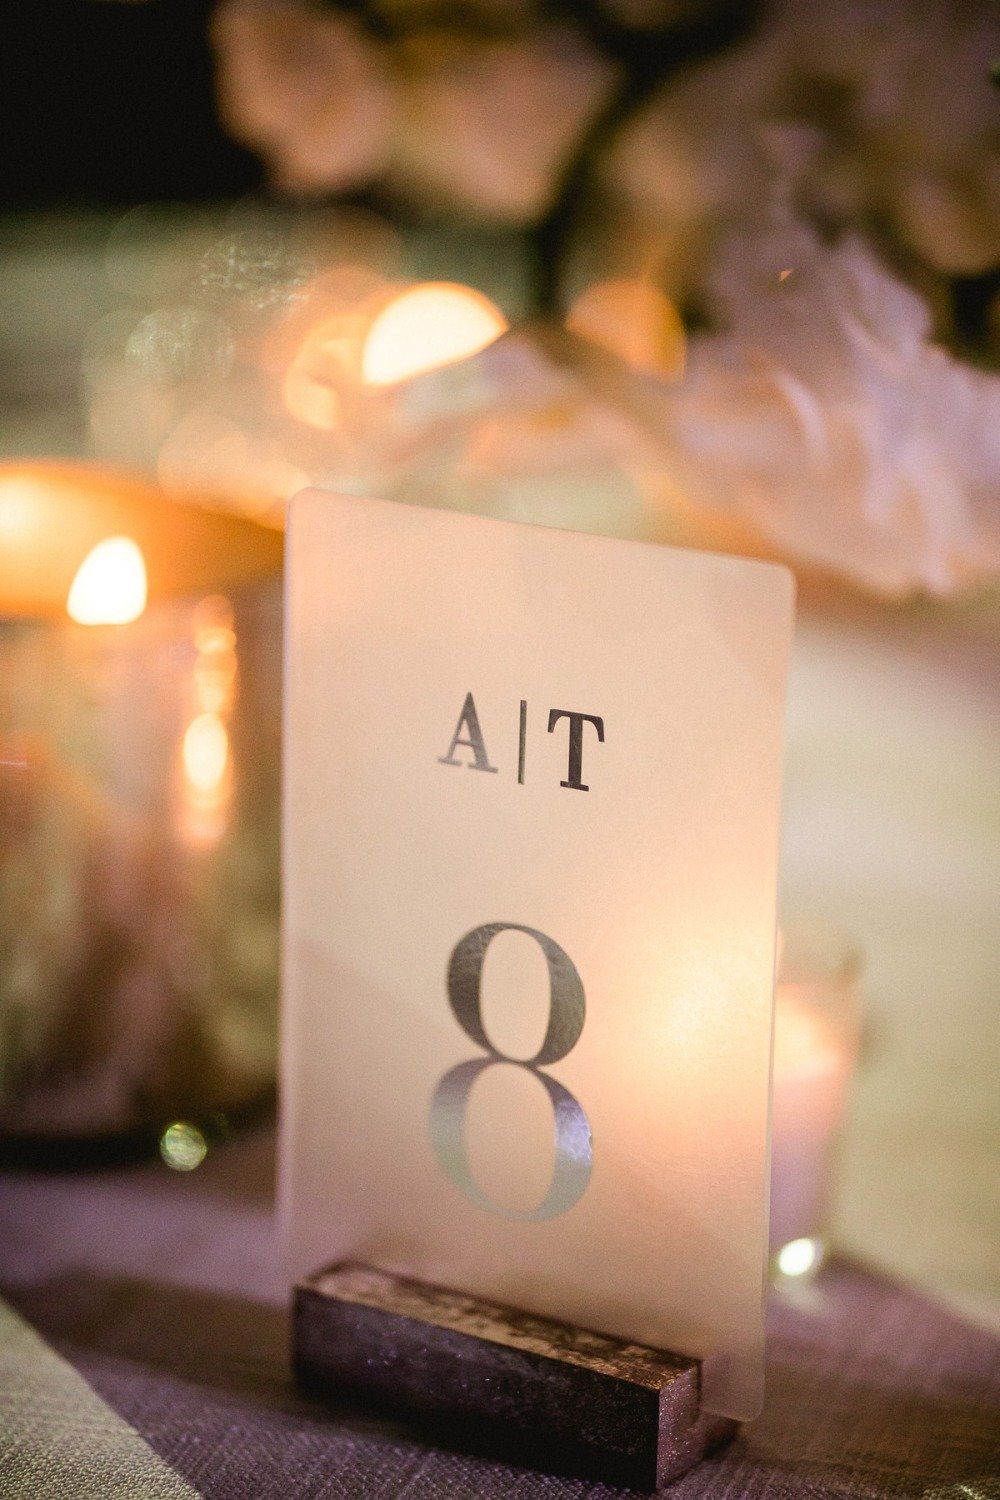 Wedding table number